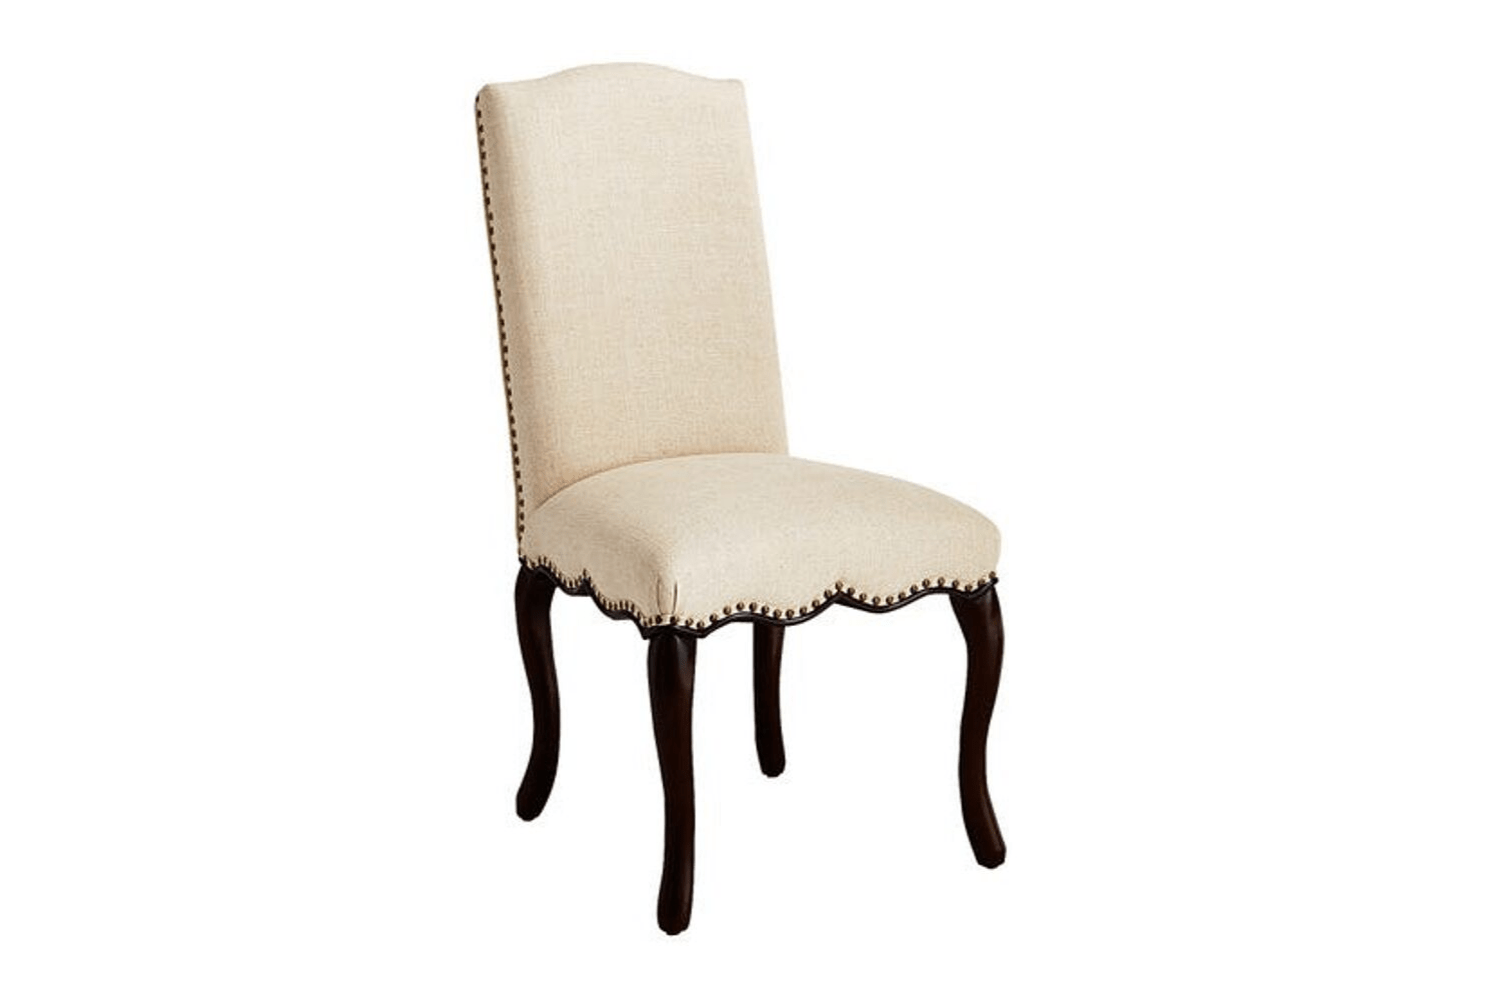 Pier One Dining Room Chair Pads